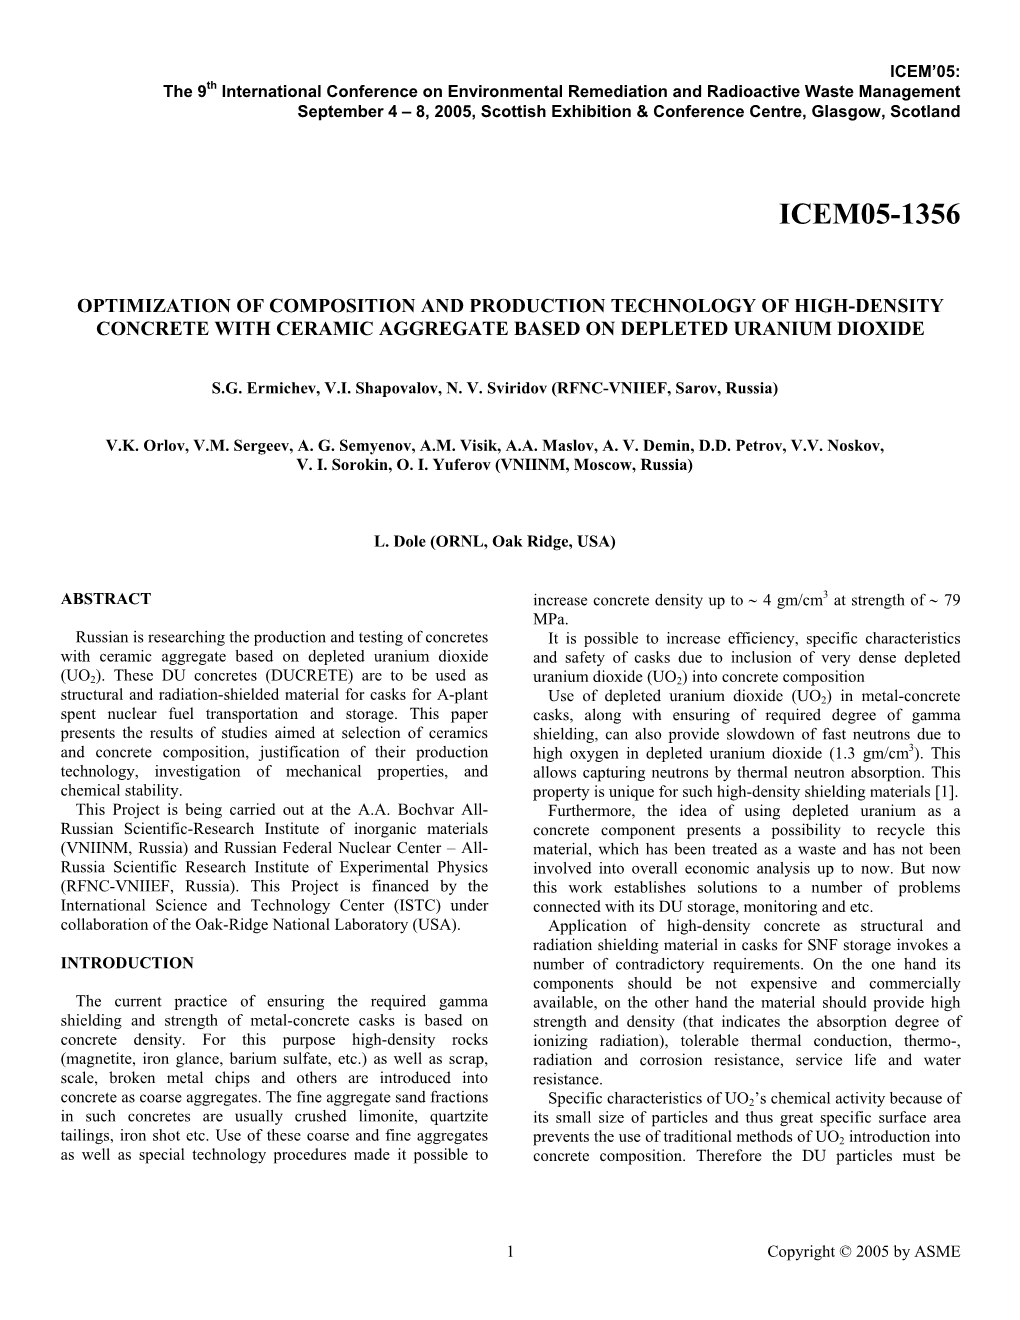 Optimization of Composition and Production Technology of High-Density Concrete with Ceramic Aggregate Based on Depleted Uranium Dioxide